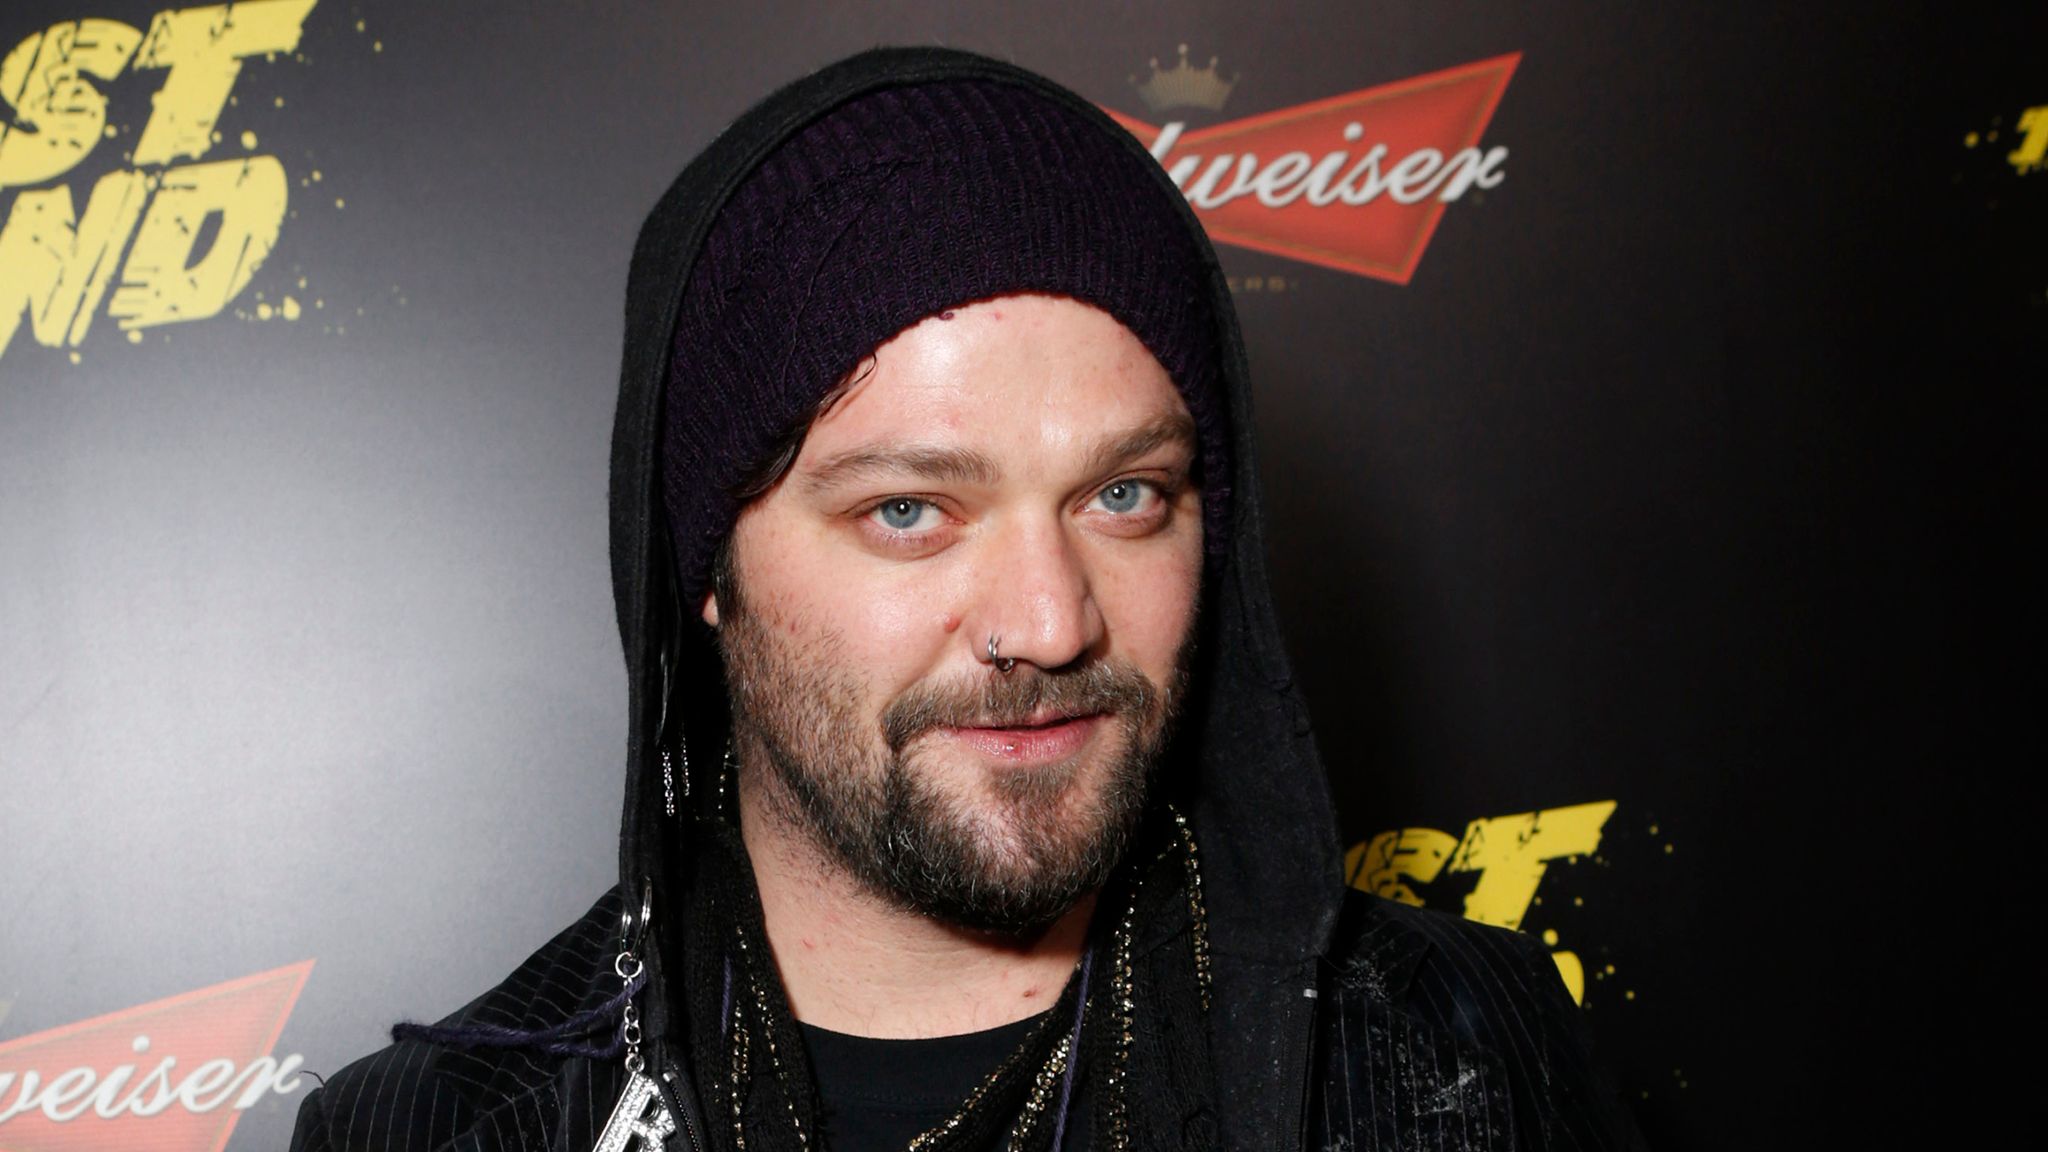 Bam Margera wants to sue Jackass makers after being dropped from latest film over drug use. Ents & Arts News